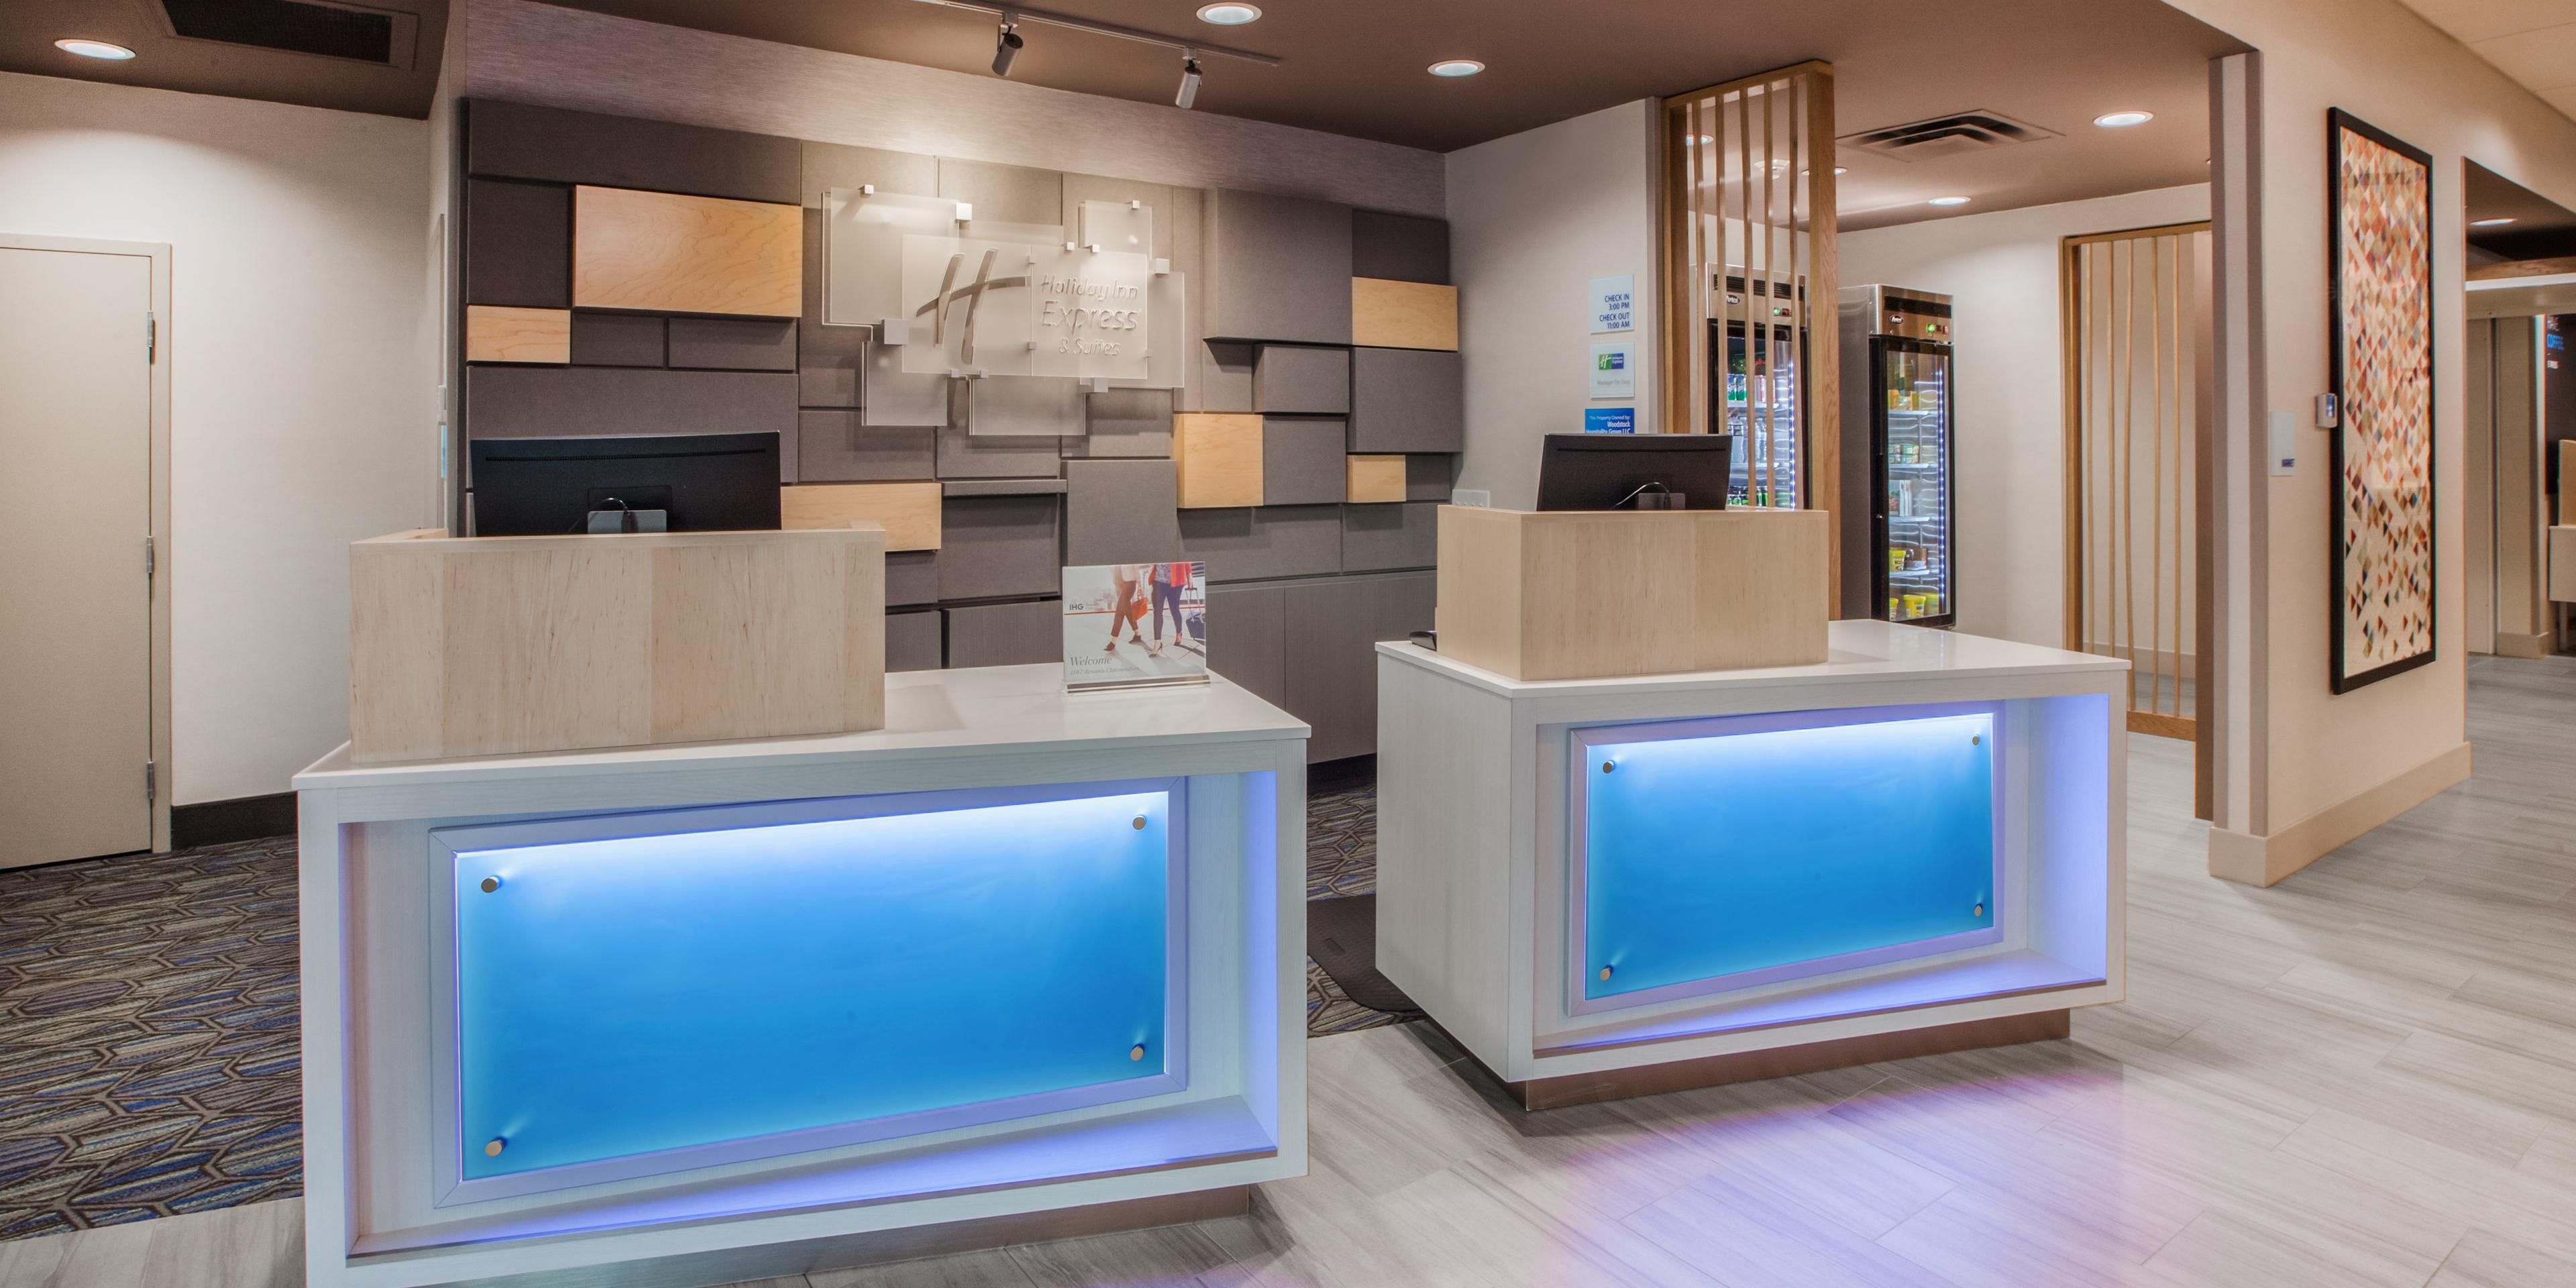 Located in Lockport, NY and only twenty minutes from downtown Niagara Falls, the all new Holiday Inn Express Lockport is ready to welcome you.